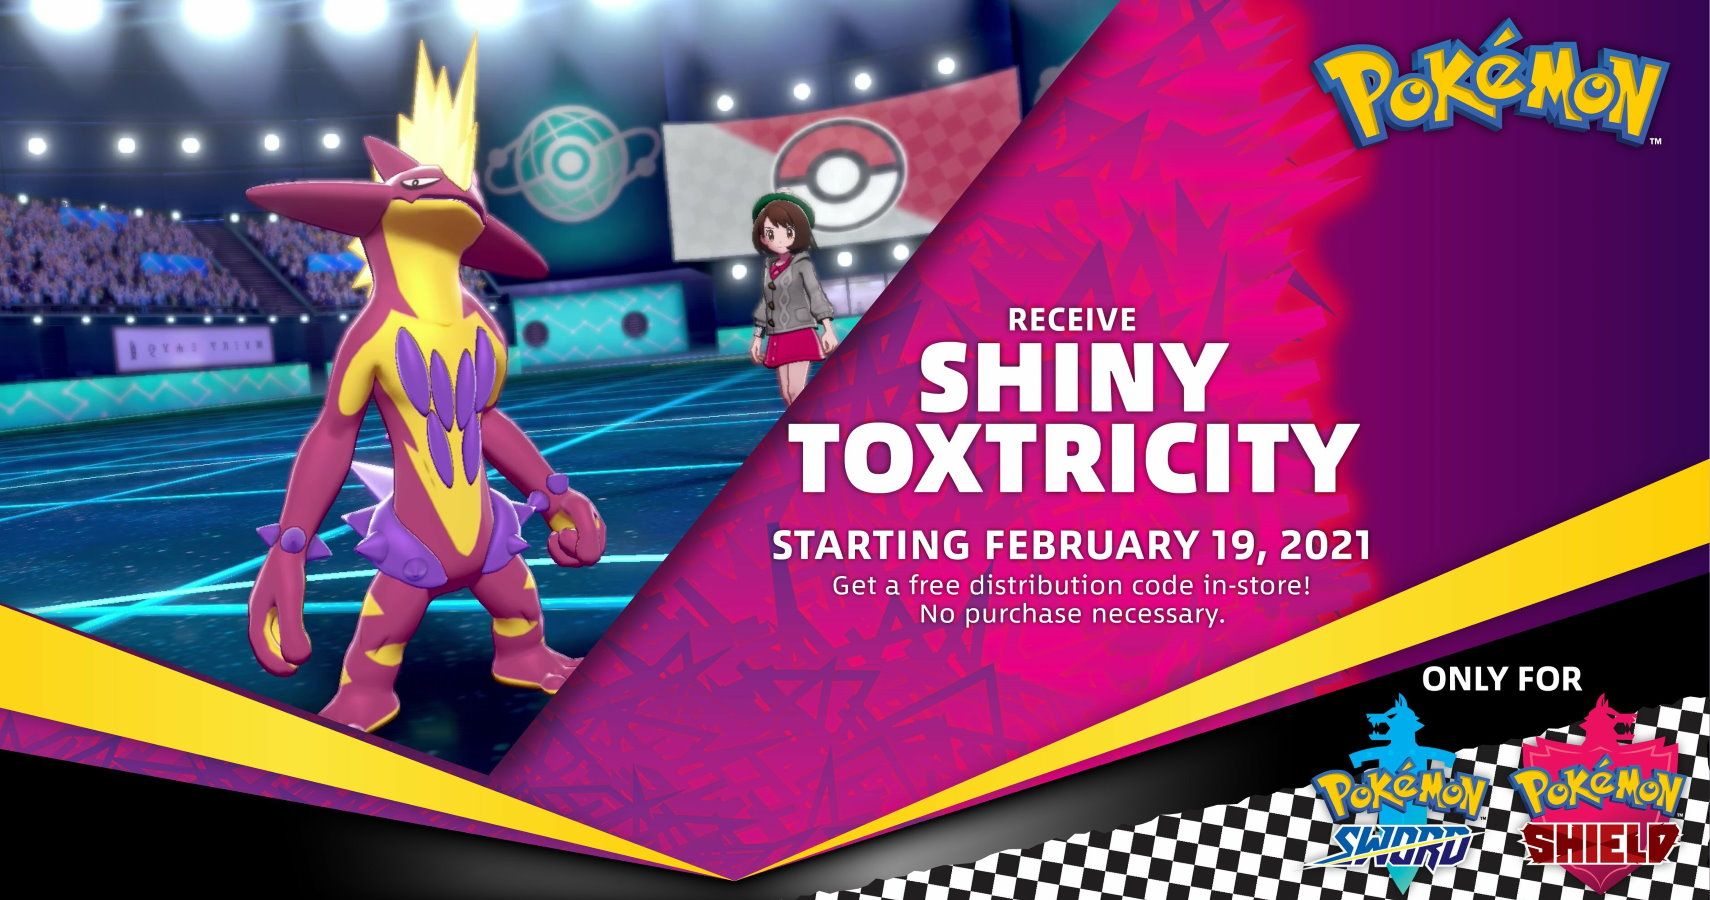 One Generous Pokemon Fan Is Giving Away Legal Shiny Toxtricity Codes